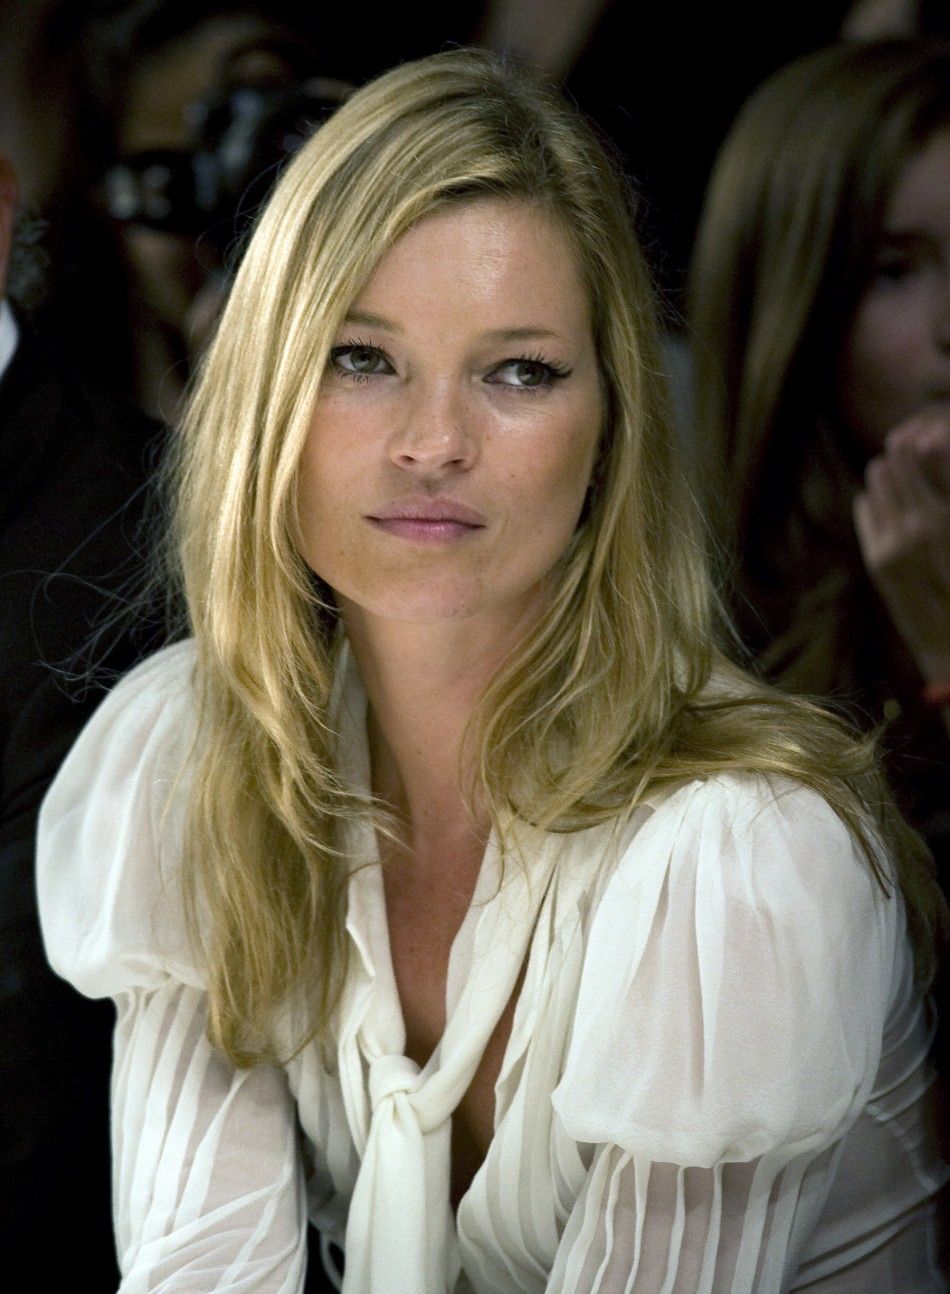 Kate Moss prepares for wedding on Friday